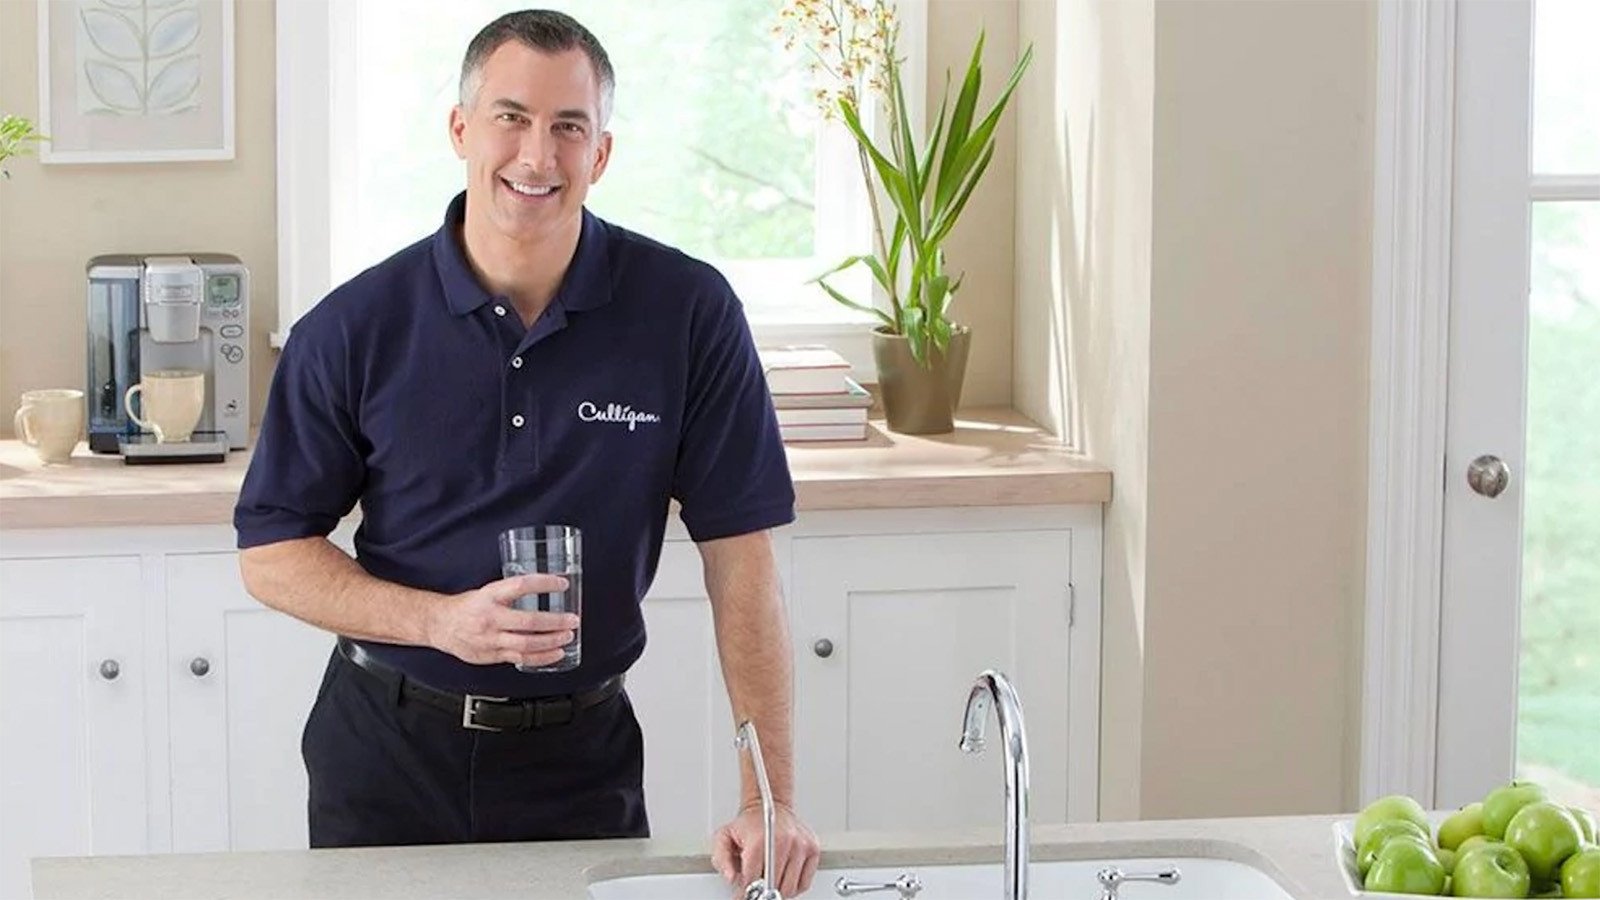 Culligan expert holding a glass of water by kitchen sink